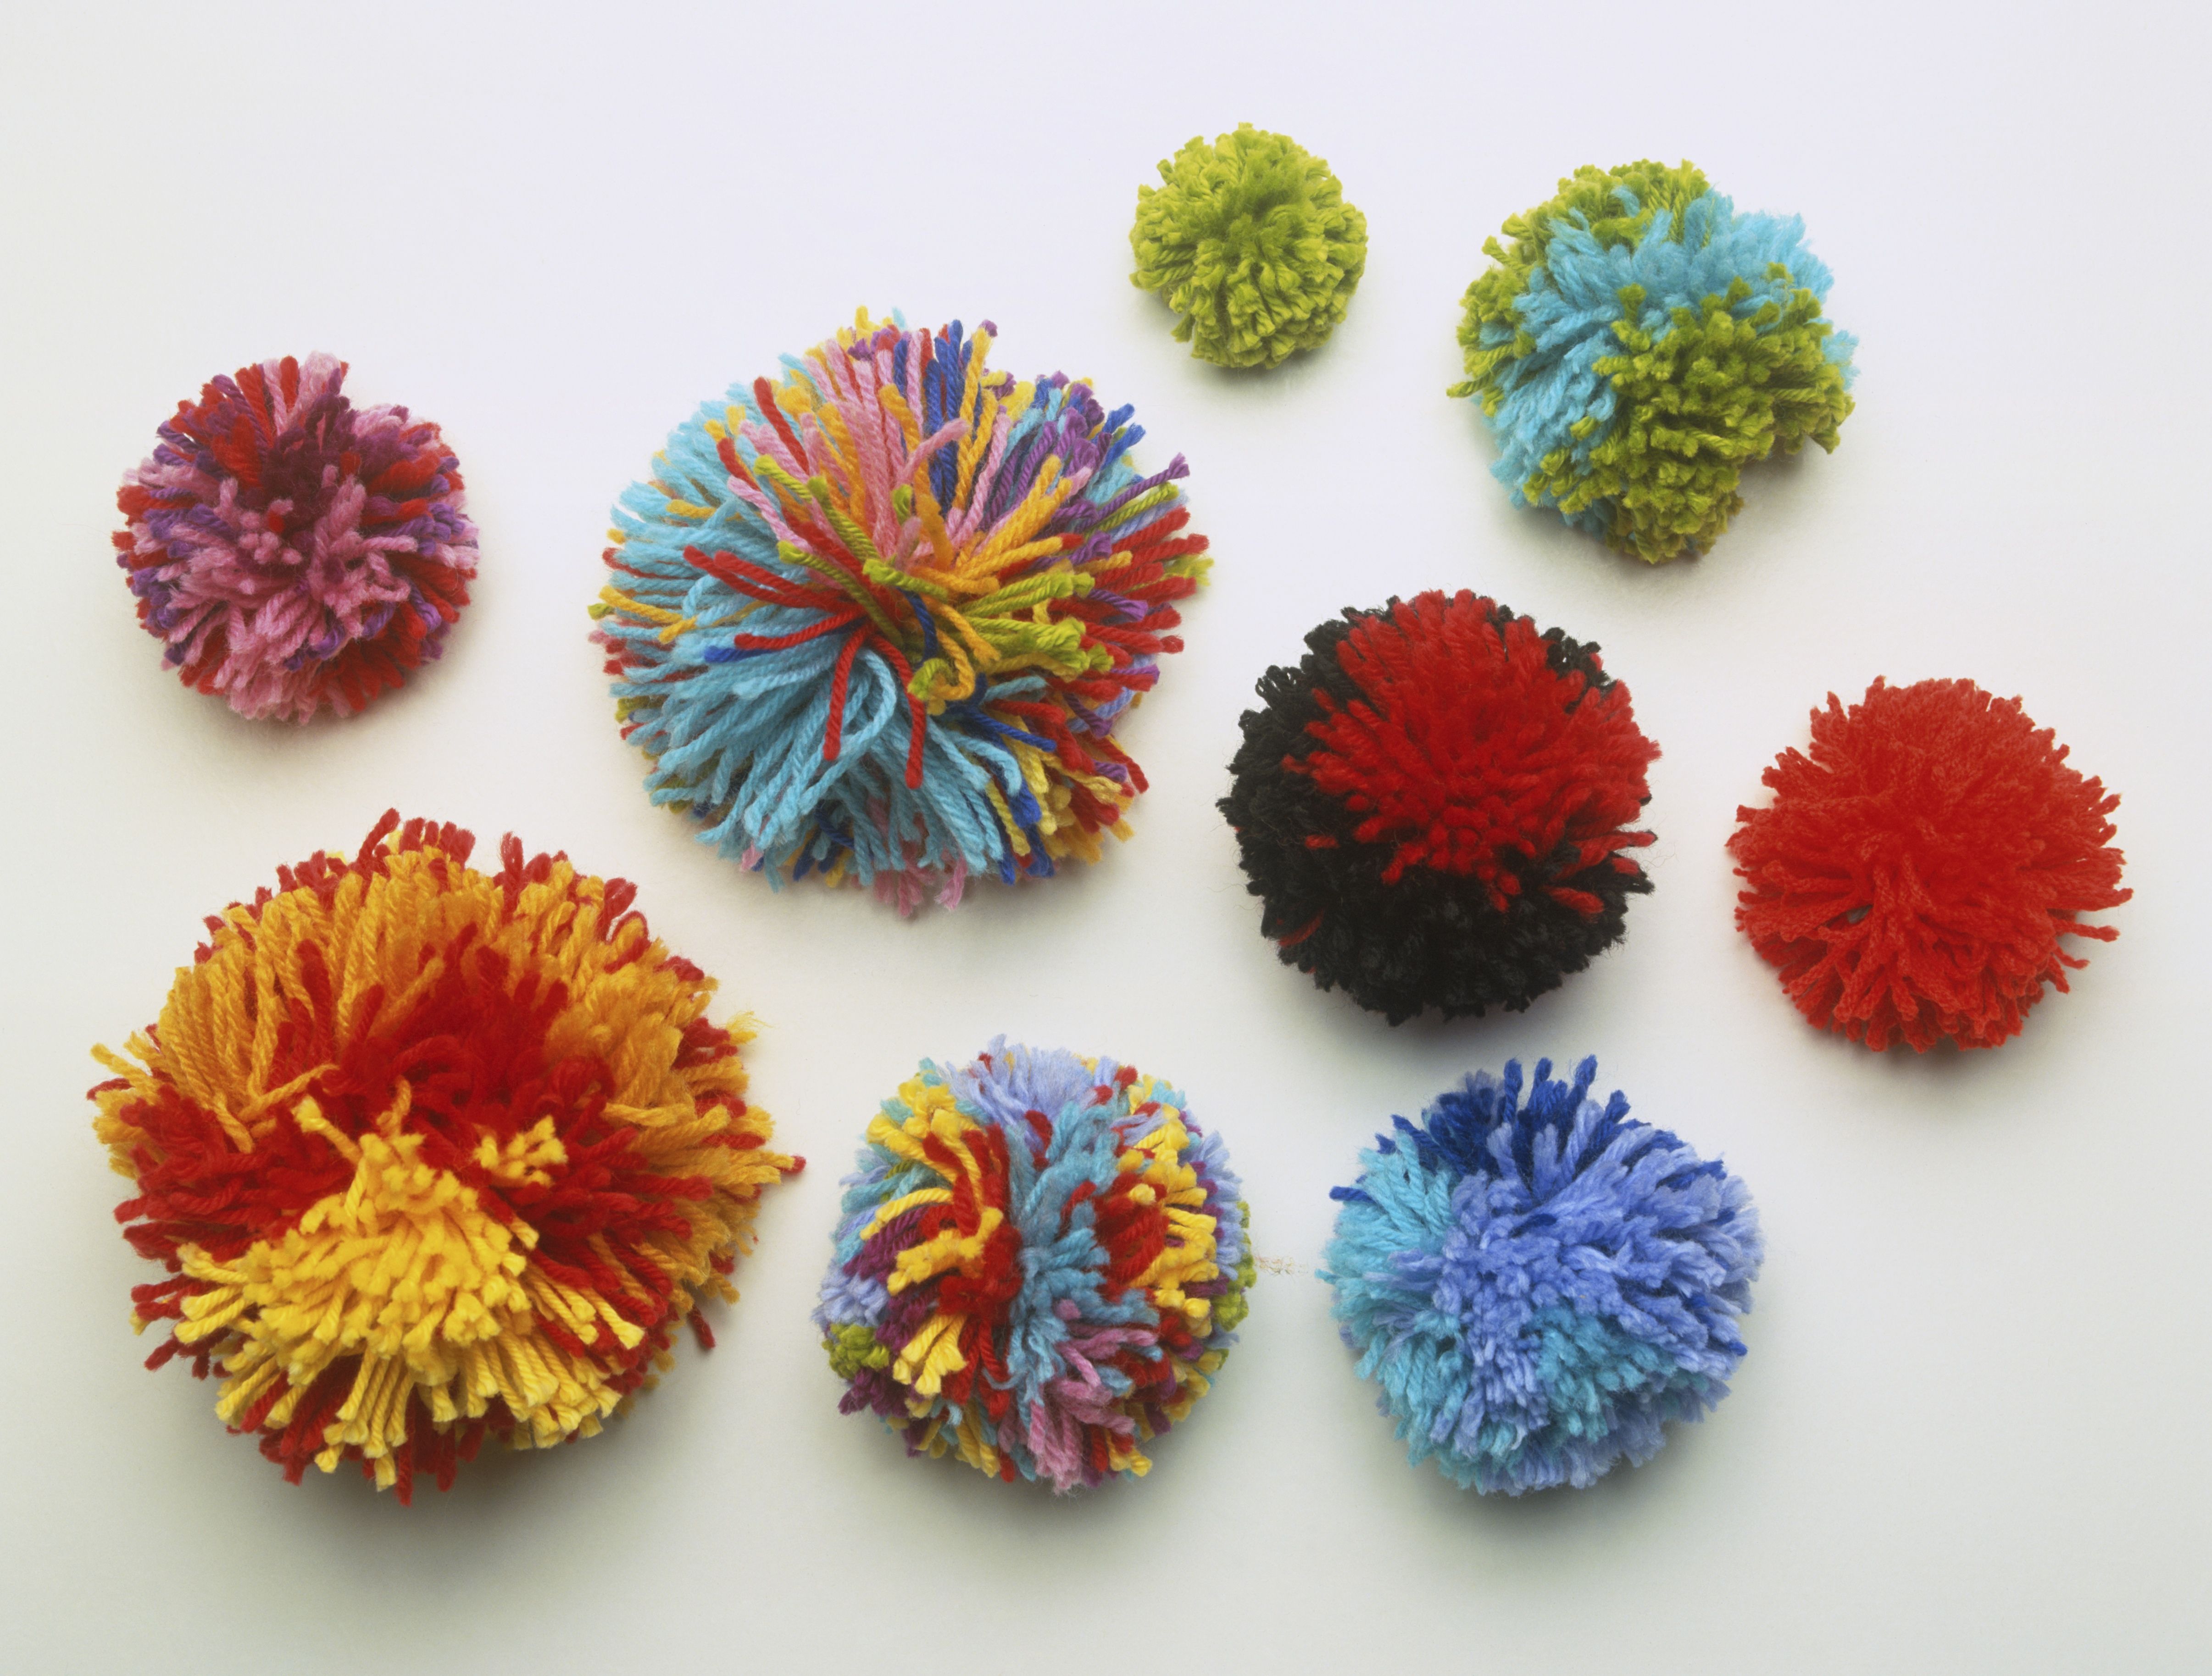 How to Make a Pom-Pom for Knitting Projects